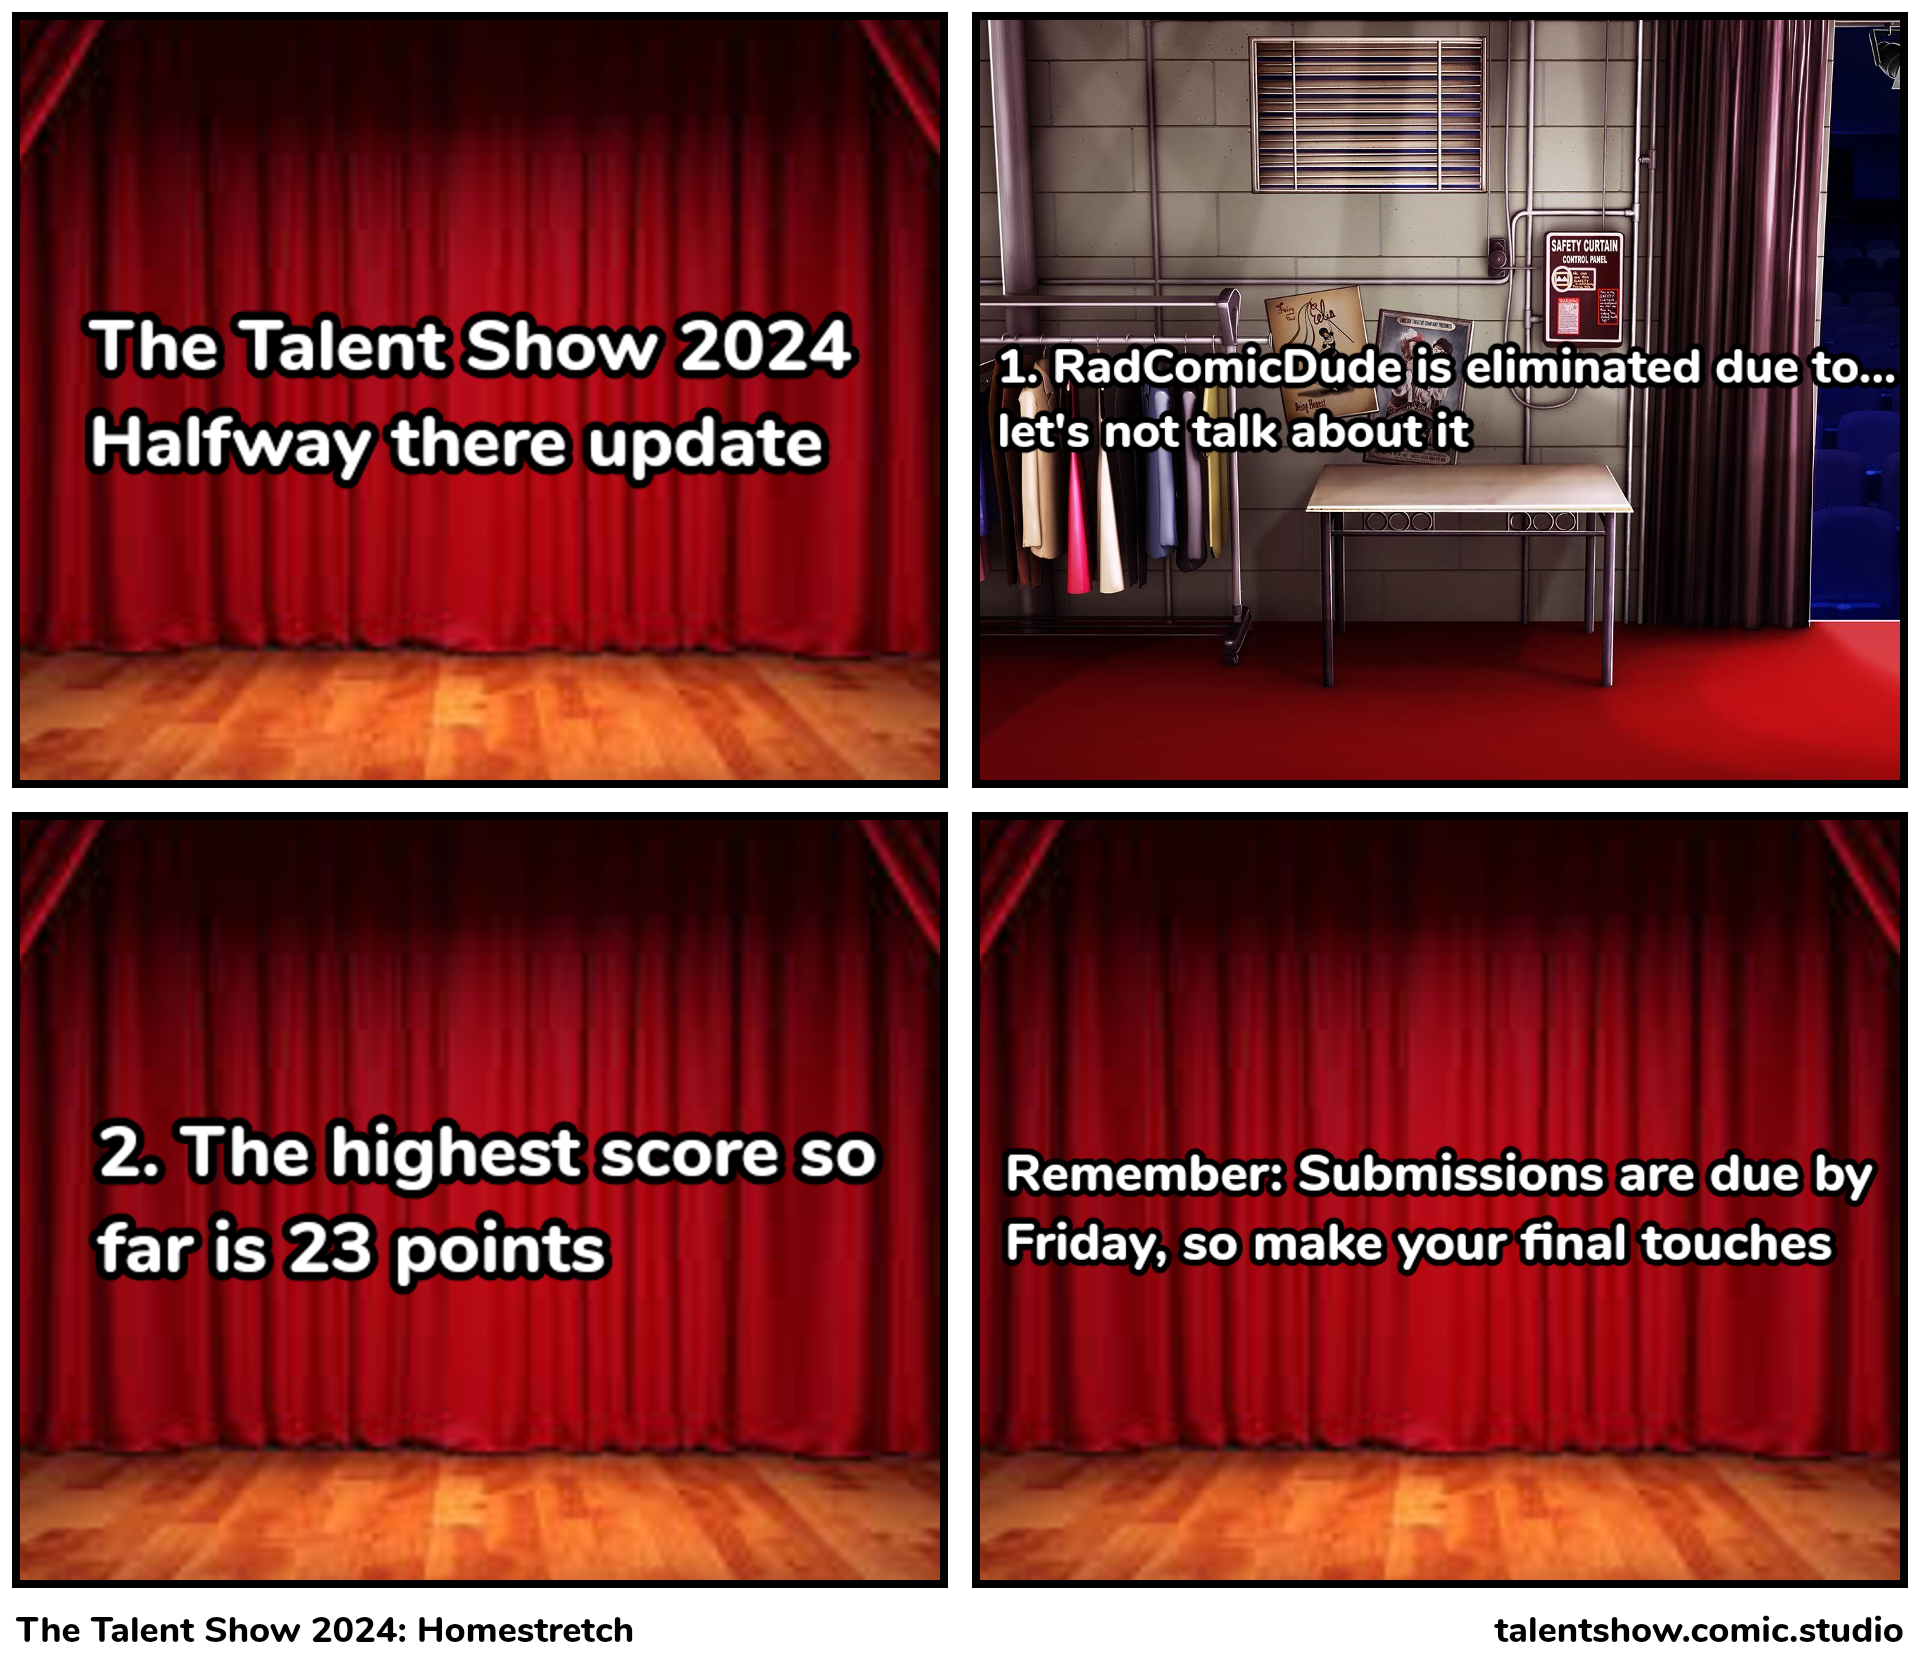 The Talent Show 2024: Homestretch